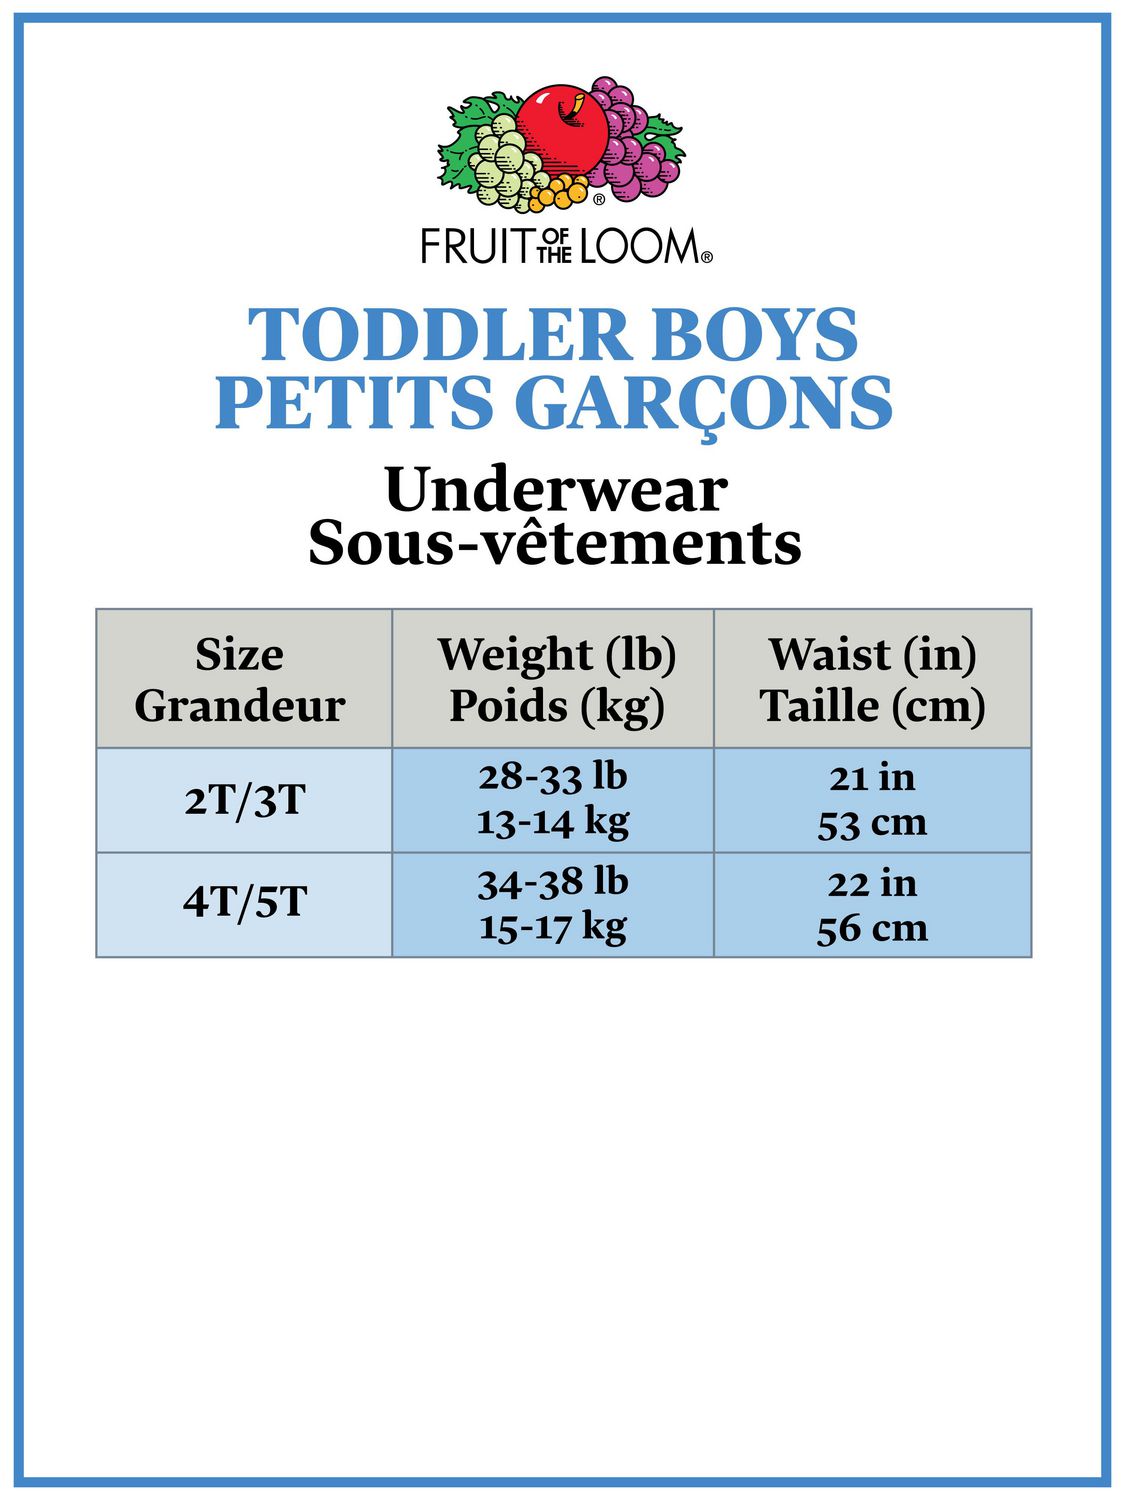 Boys' Toddler Size Guide  Shop Fruit of the Loom Boys